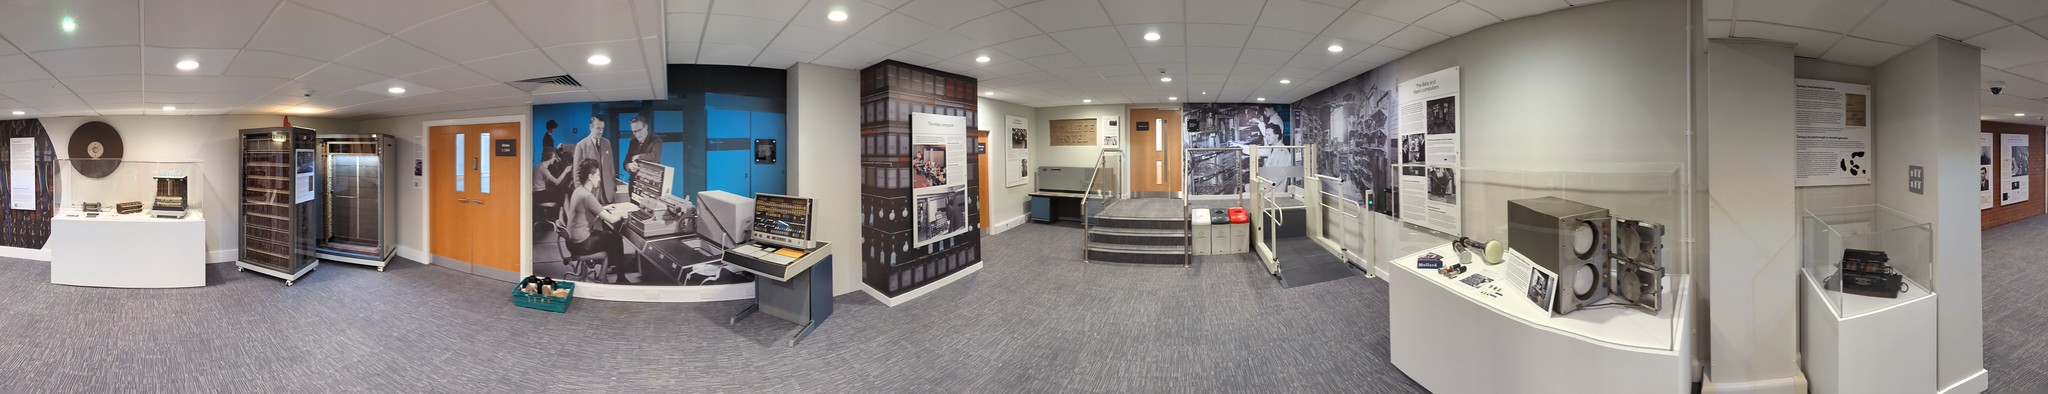 Panorama of the Atlas suite in the Kilburn building, Manchester which exhibits hardware from several Manchester computers such as the Atlas computer. Picture by Yours Truly.